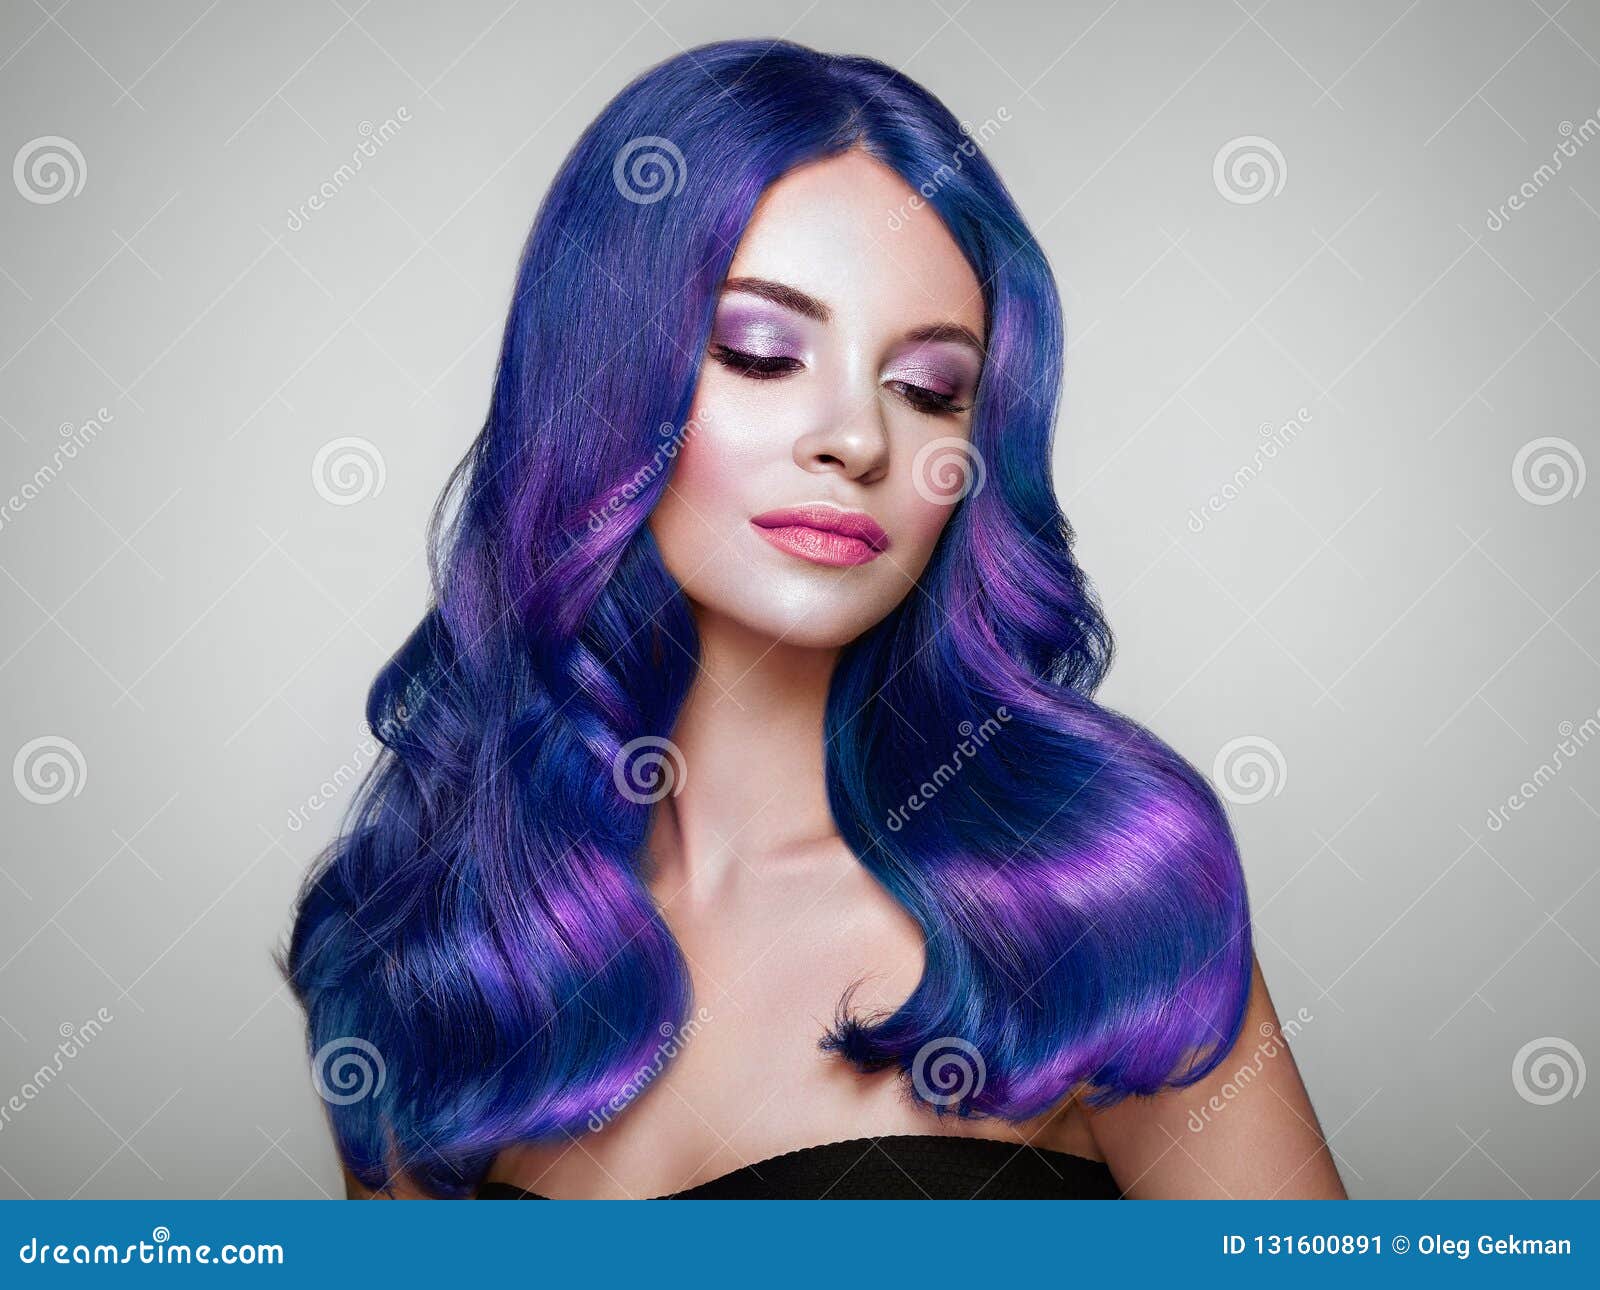 Beauty Fashion Model Girl With Colorful Dyed Hair Stock